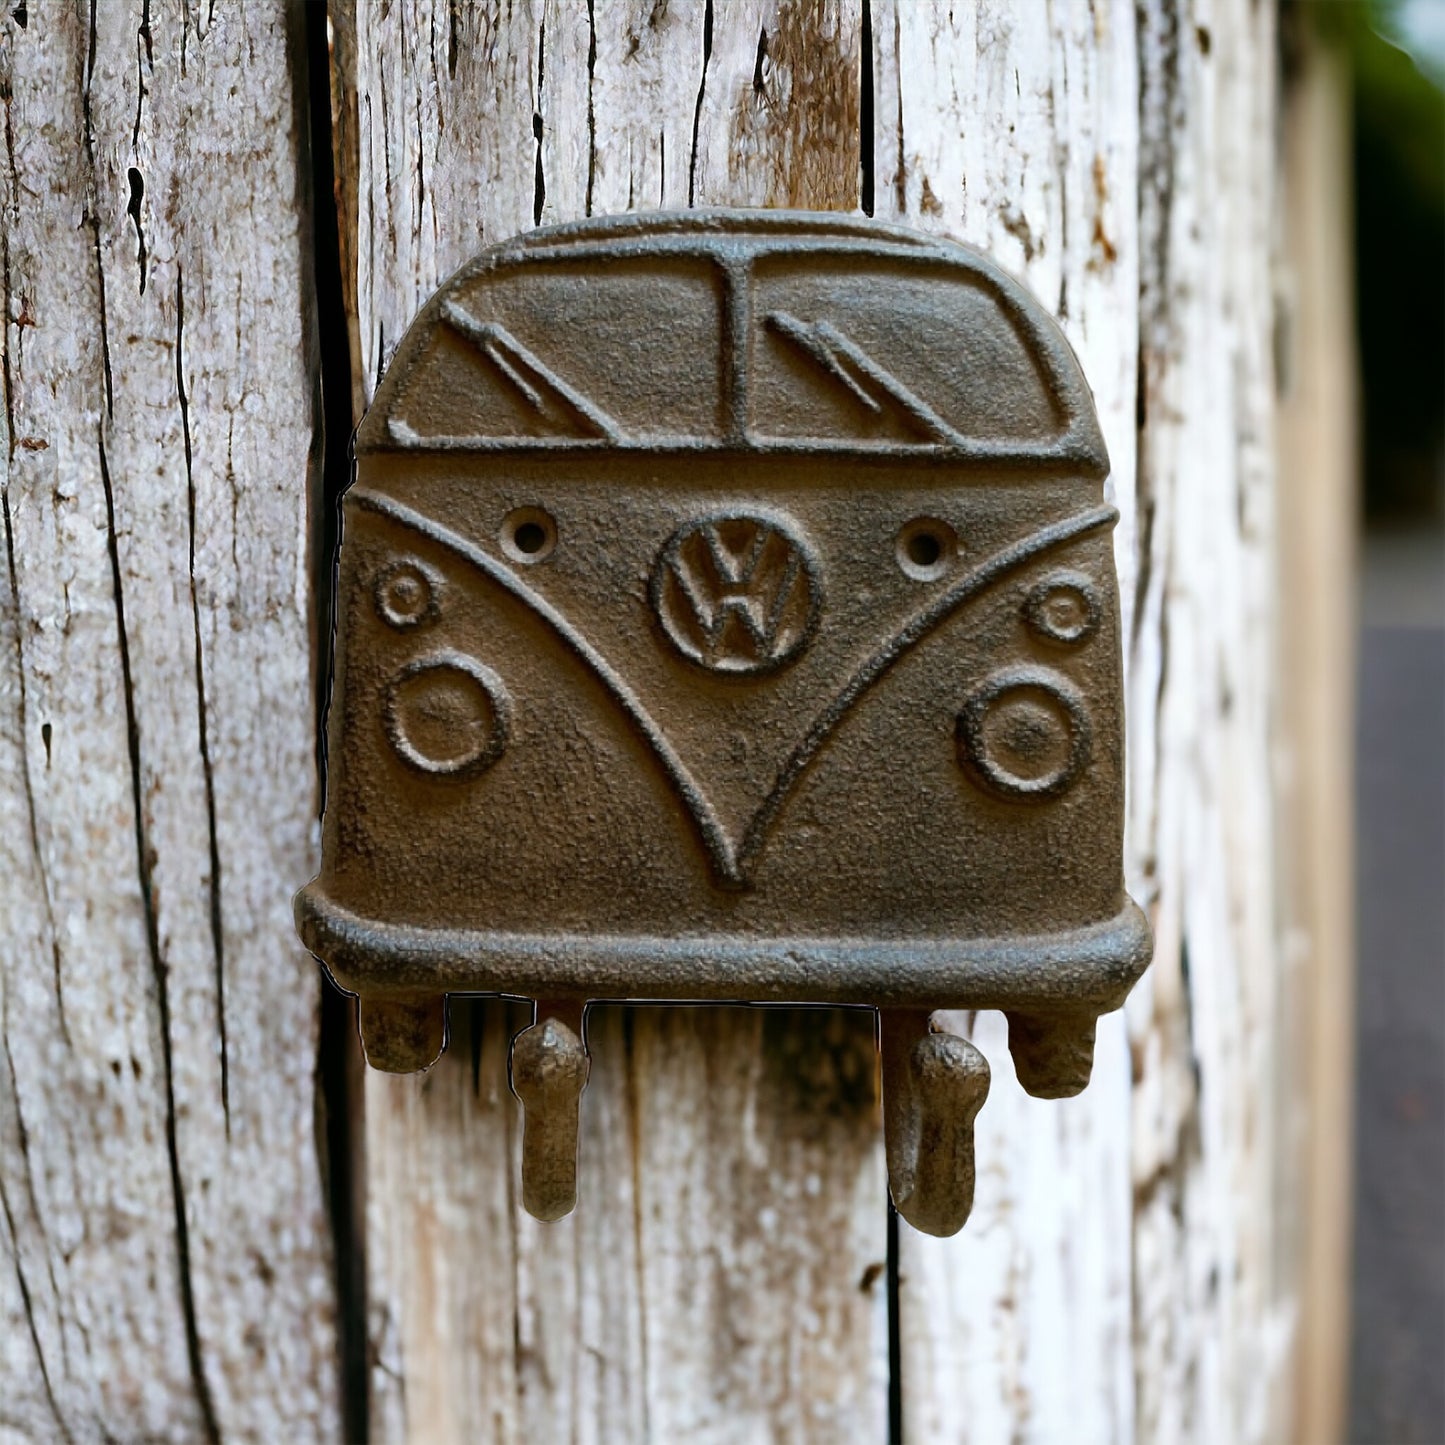 Kombi VW Hook Rustic Cast Iron - The Renmy Store Homewares & Gifts 